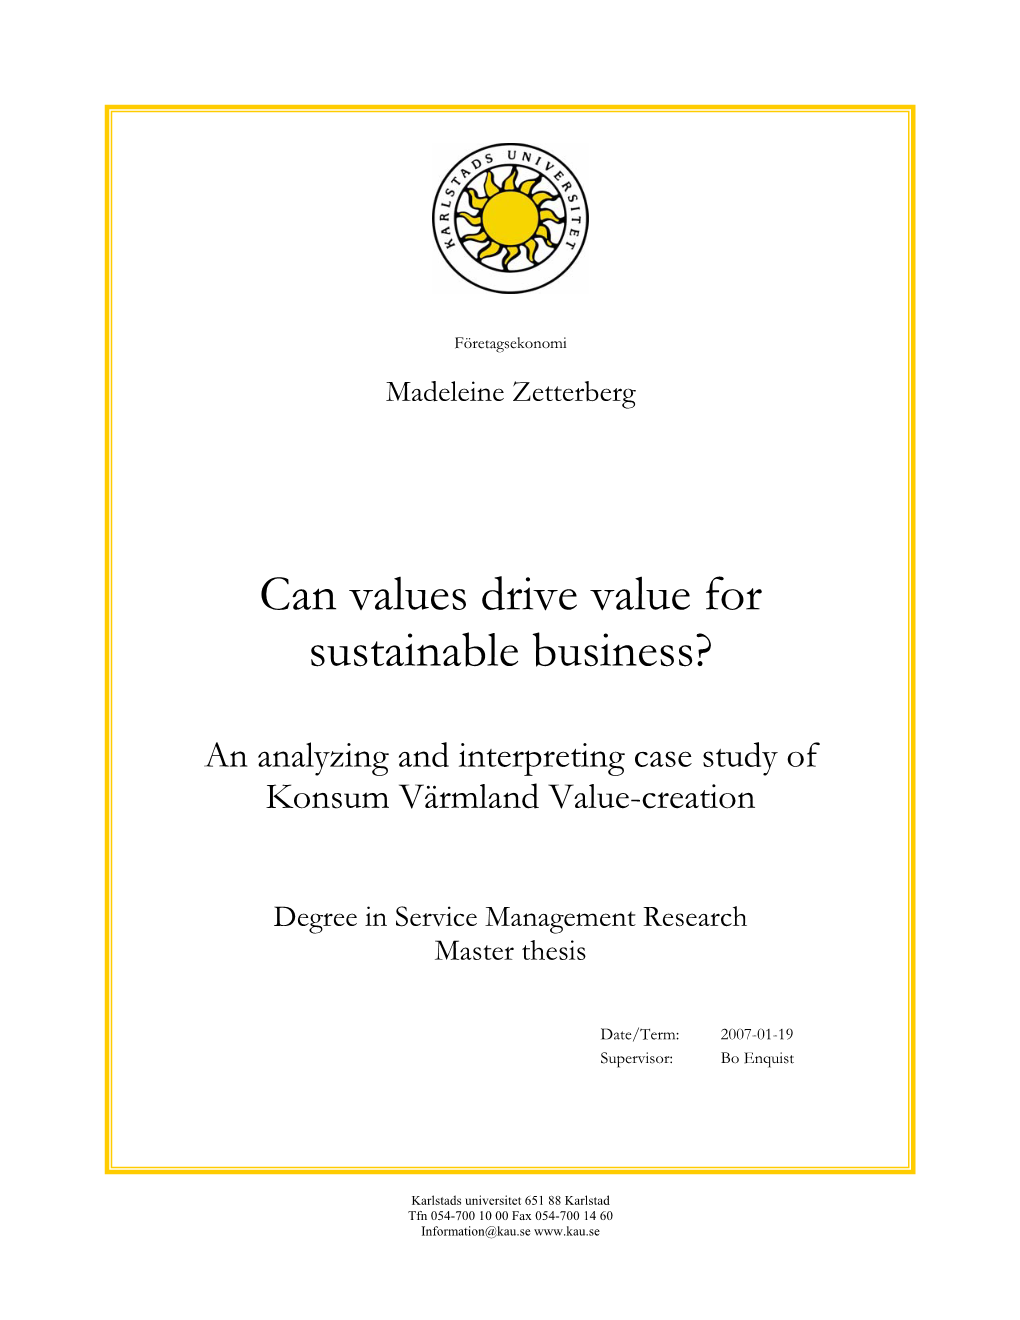 Can Values Drive Value for Sustainable Business?